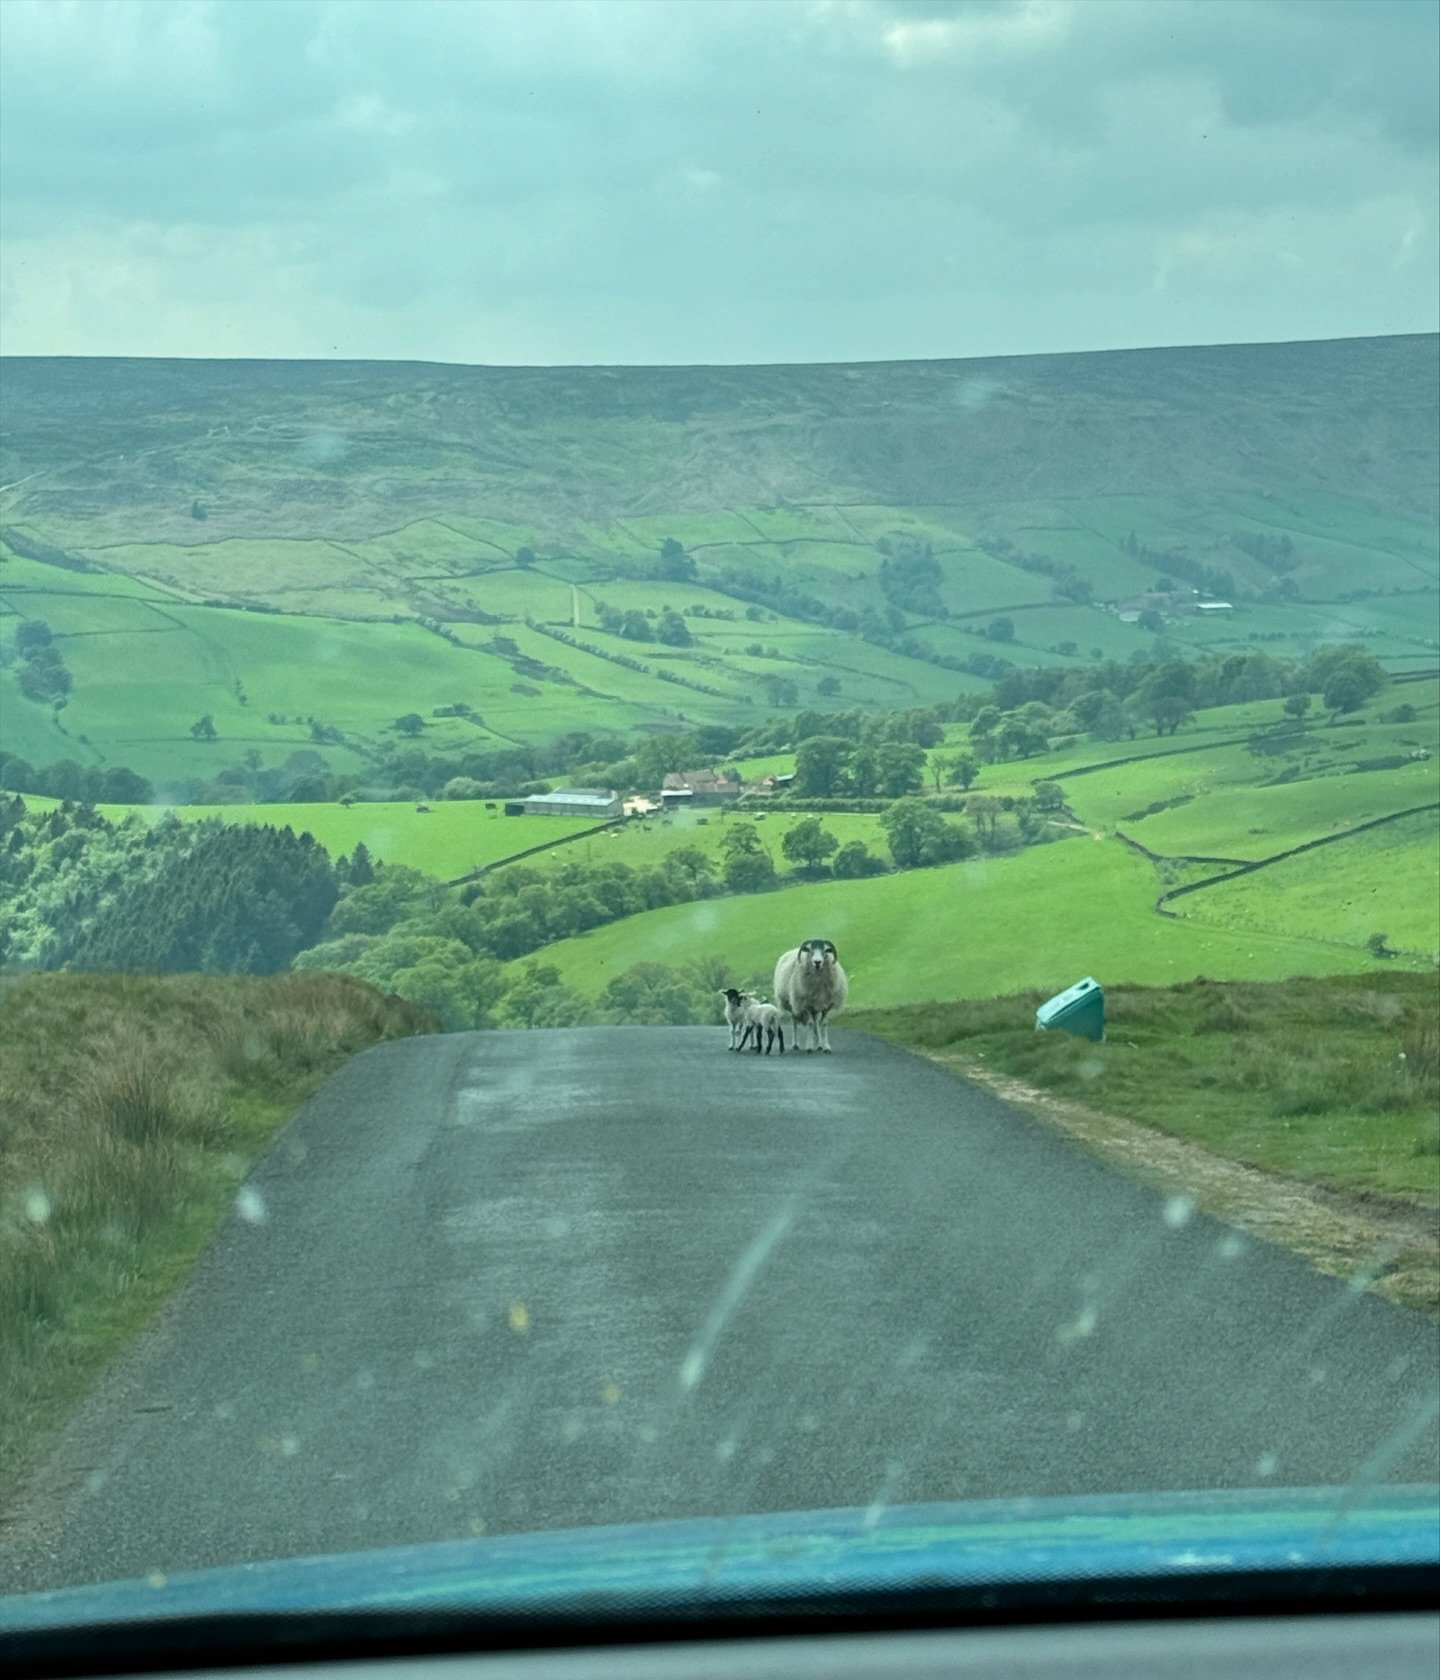 This photo very much sums up our drive over the North Yorkshire moors today. A whole lot of bug splats on the windscreen, sheep - and gorgeous lambs! - in the middle of the road, looking at us as if to say &ldquo;Really?&rdquo; when we drove slowly t